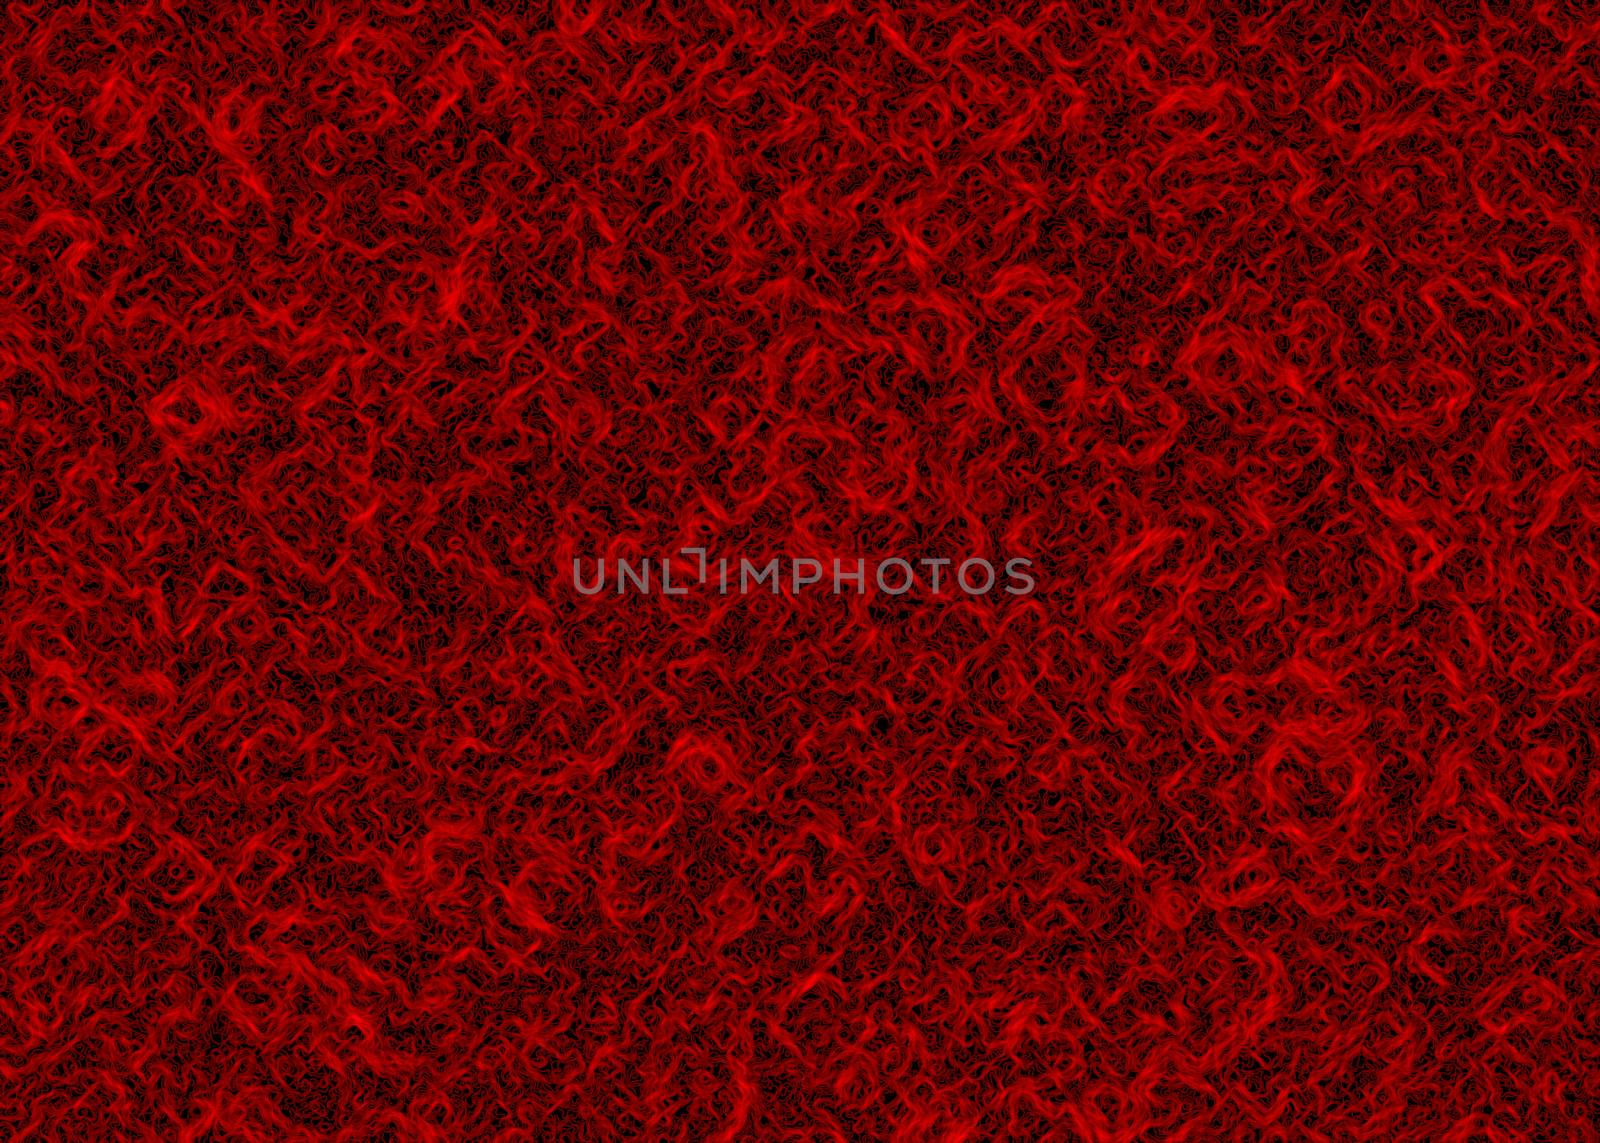 Red abstract wavy background. Textured clothing surface.